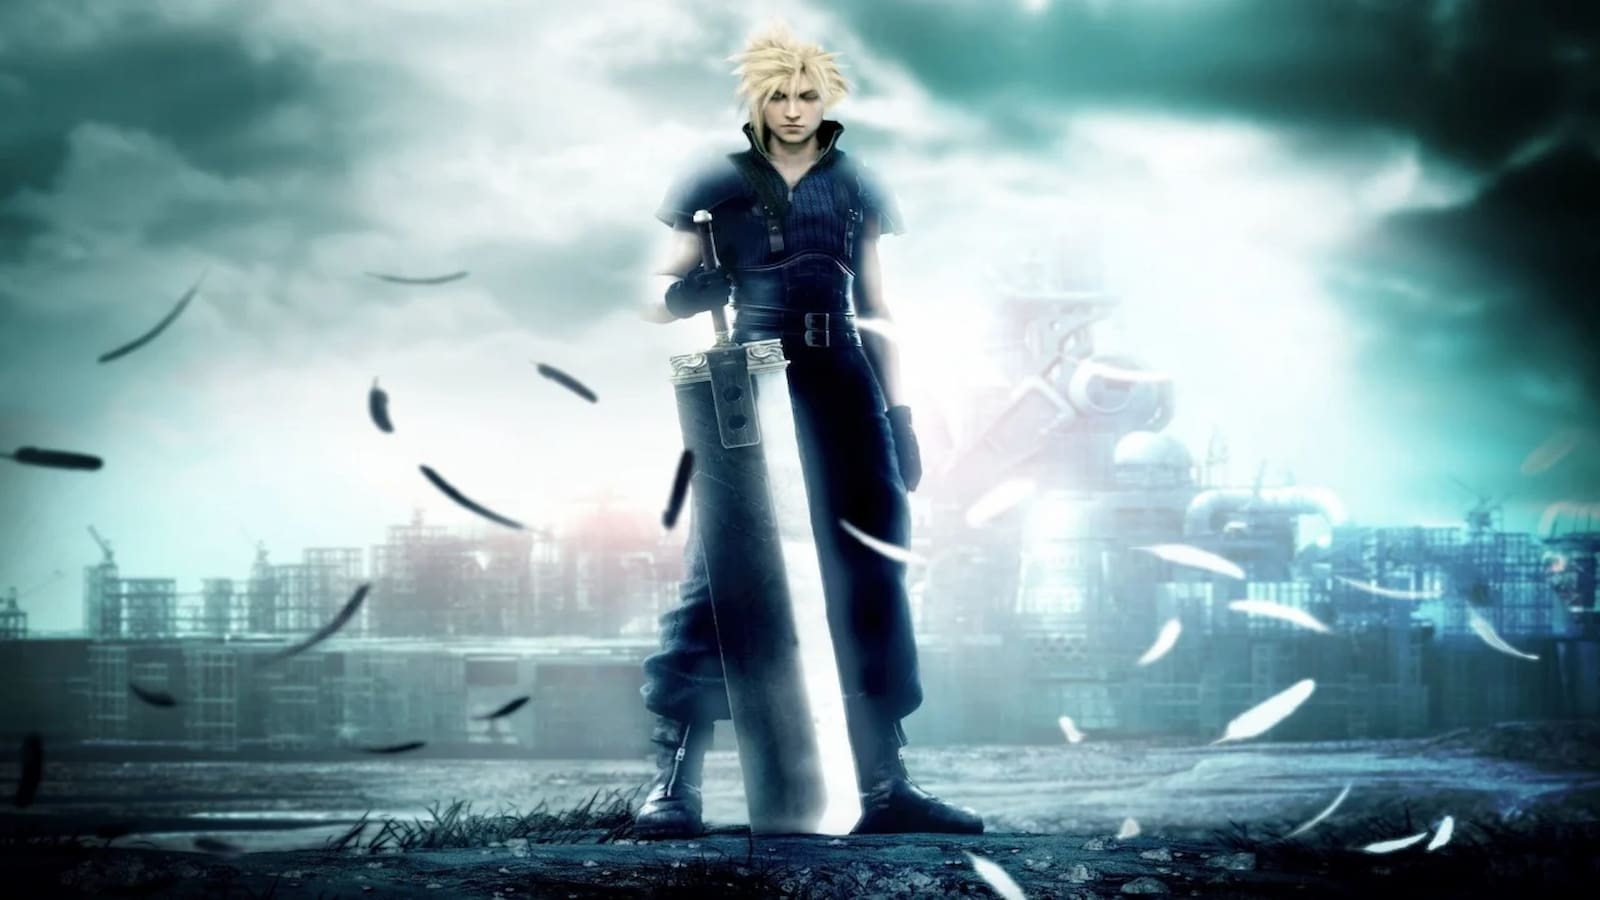 Final Fantasy VII Remake Part 2: Thoughts, Theories, and Release Date